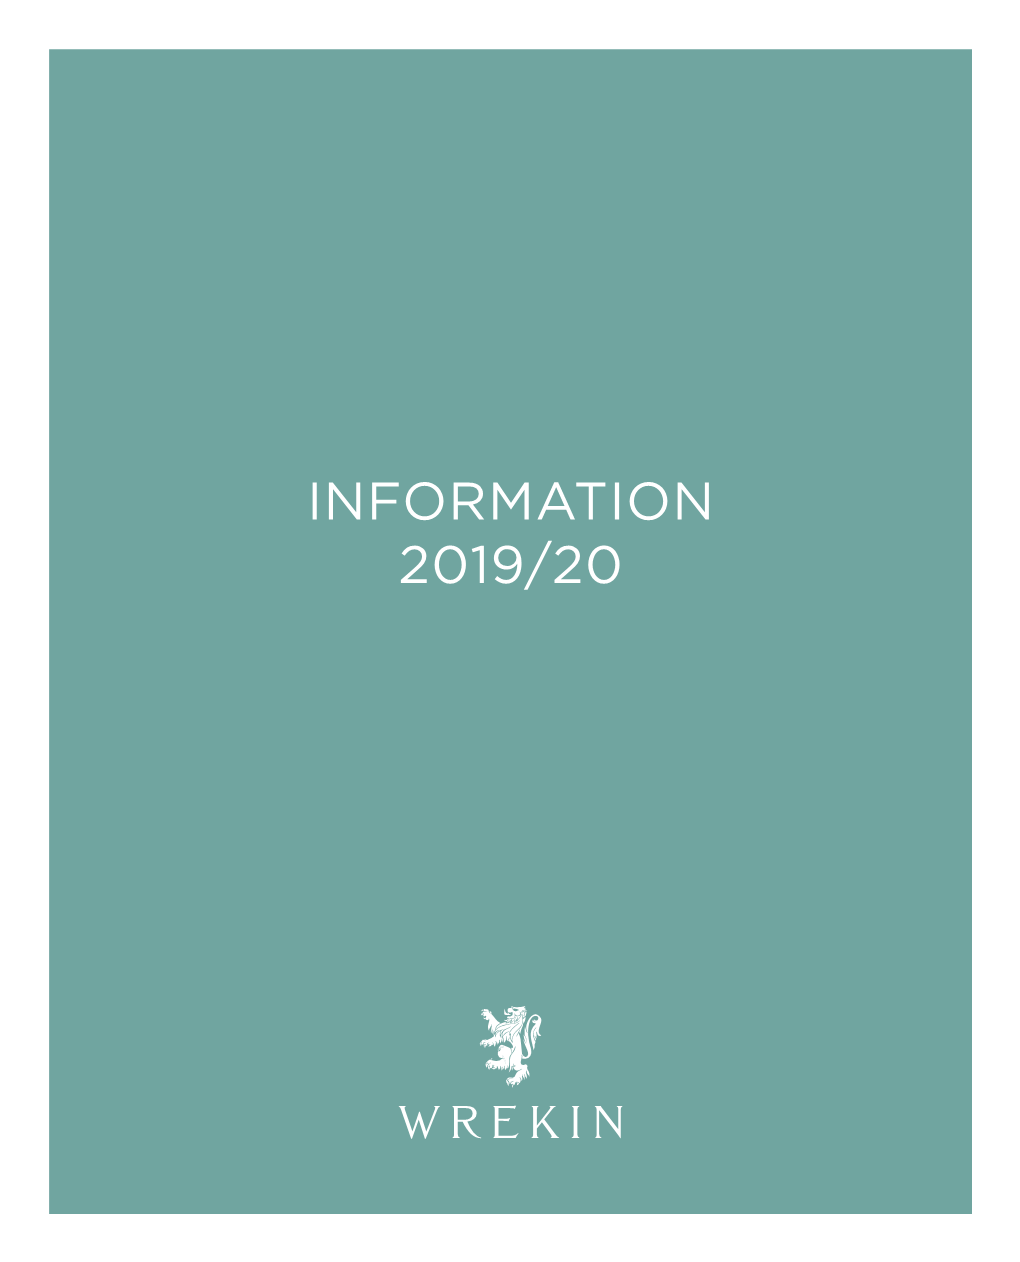 INFORMATION 2019/20 “Wrekin Grows Confident, Capable Individuals, Ready to Make a Success of the Future